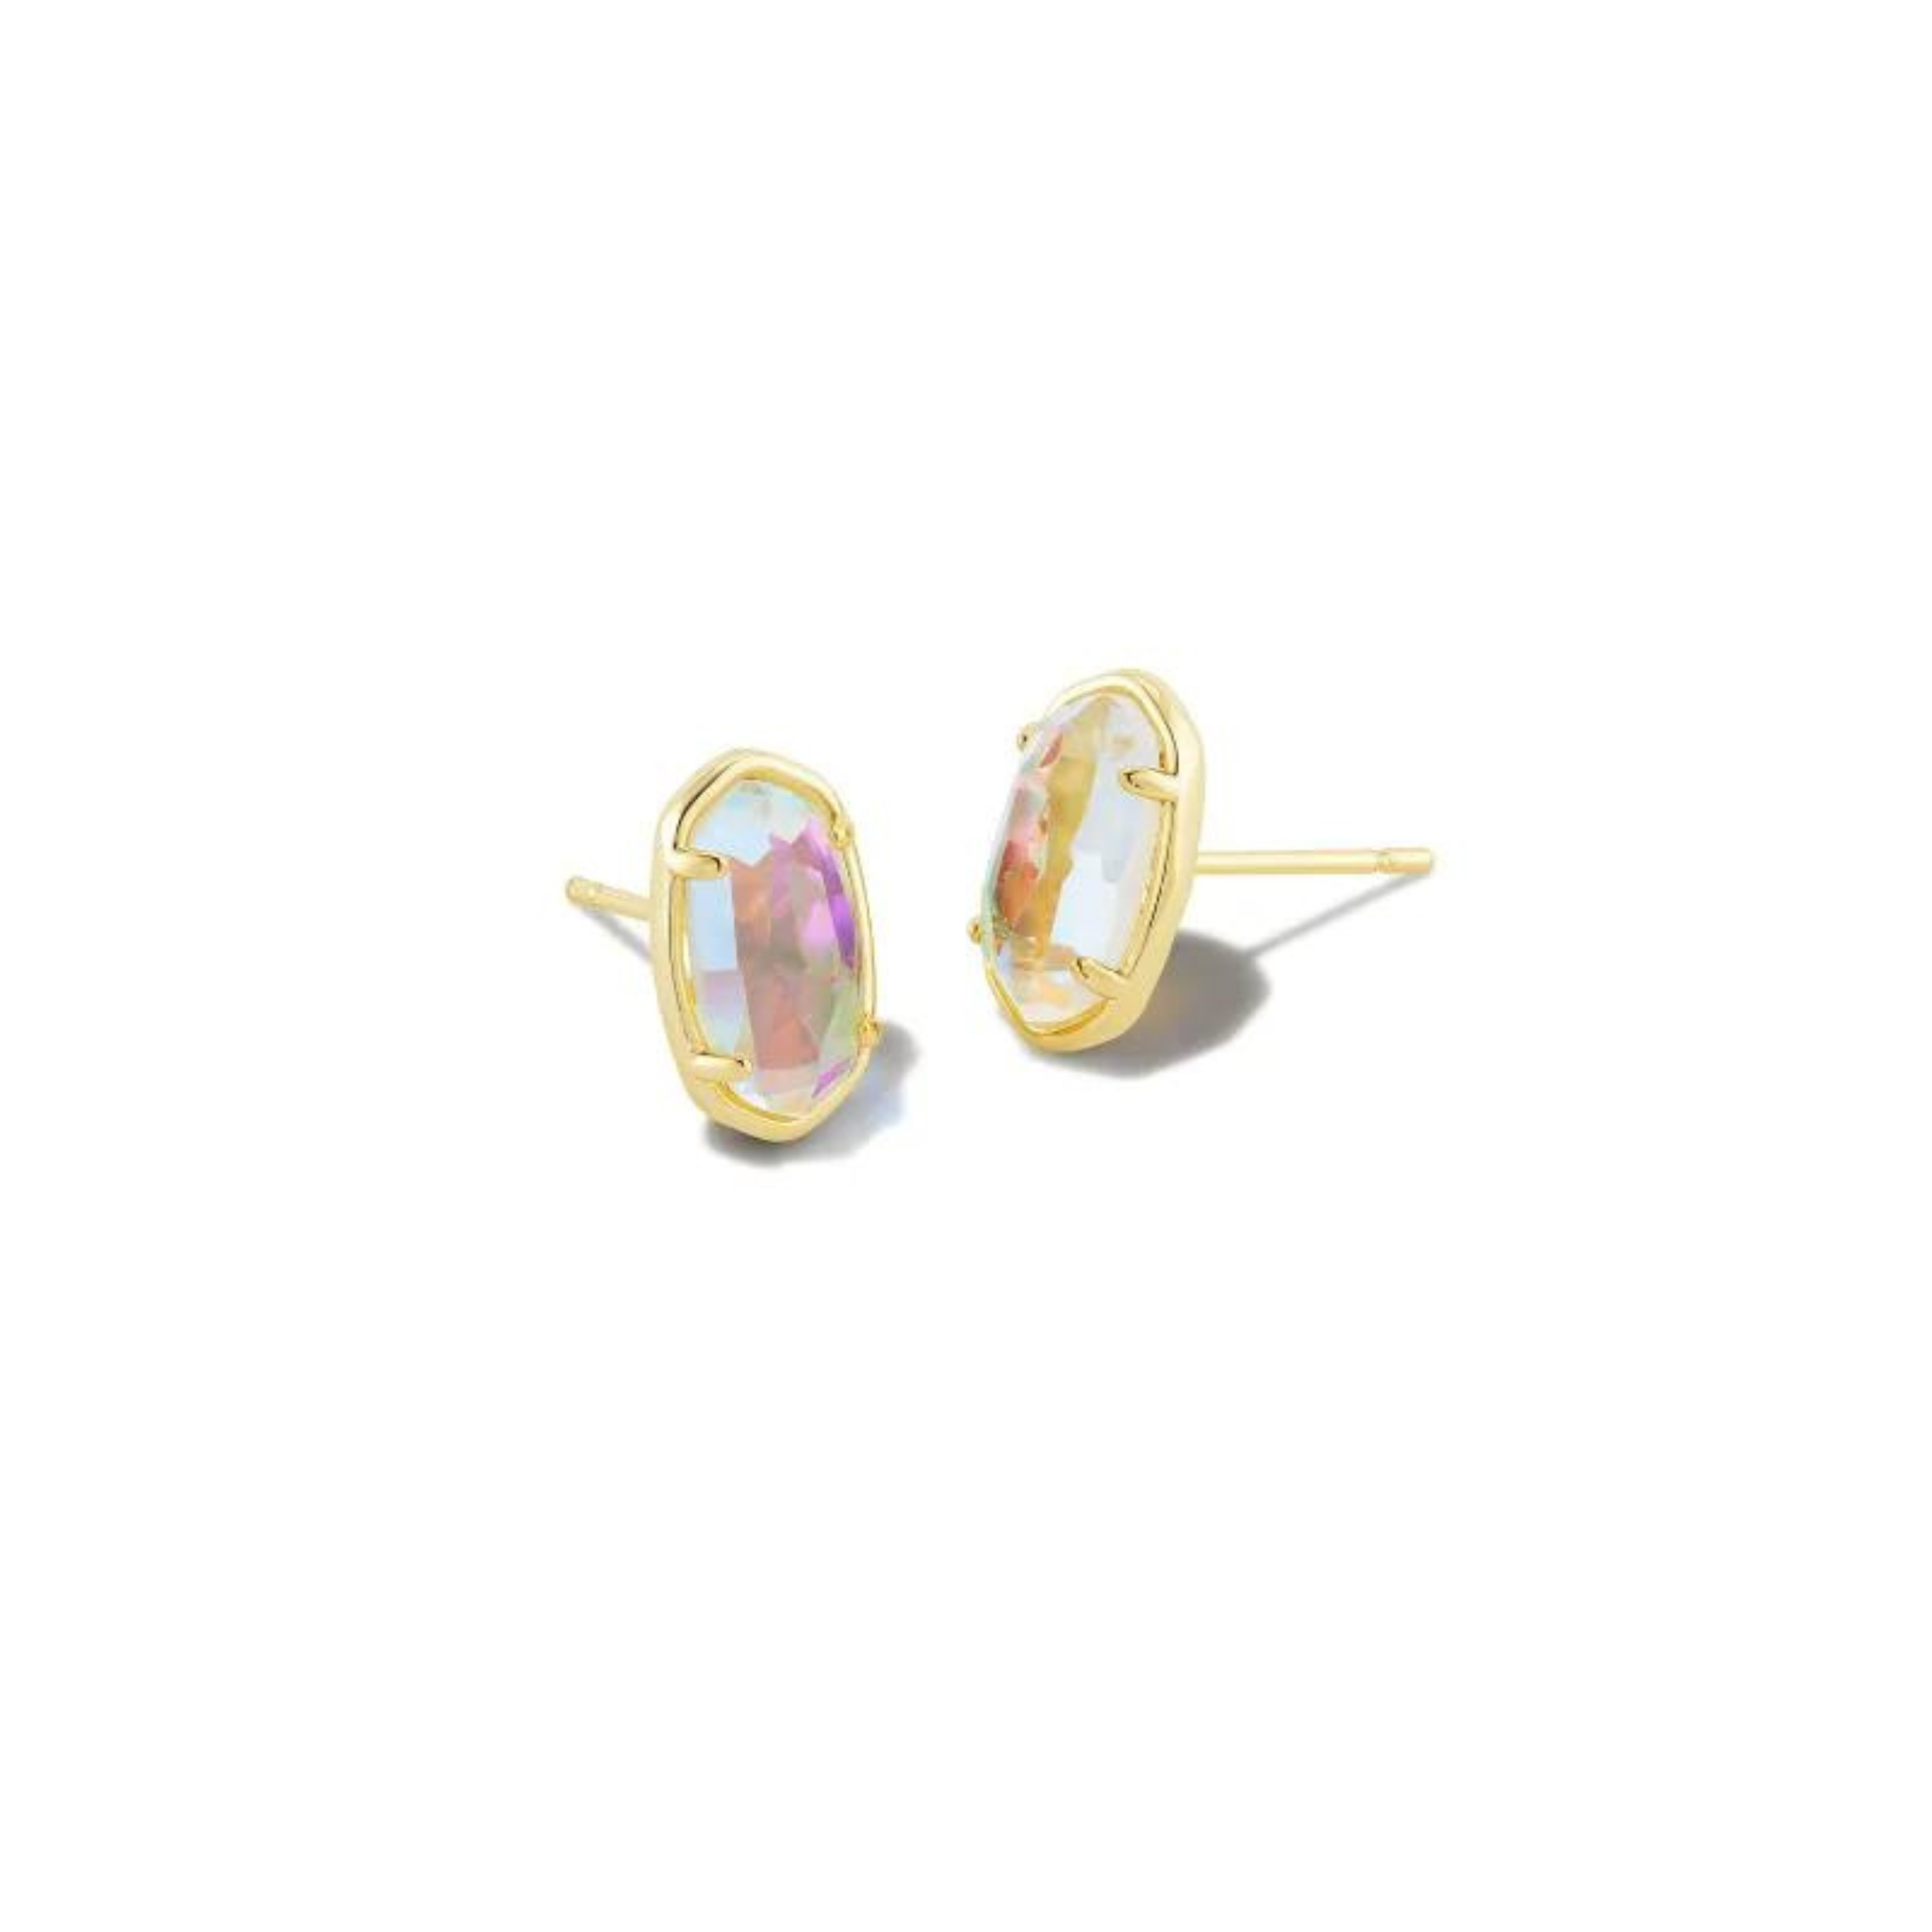 Gold earrings with dichroic glass centers pictured on a white background.